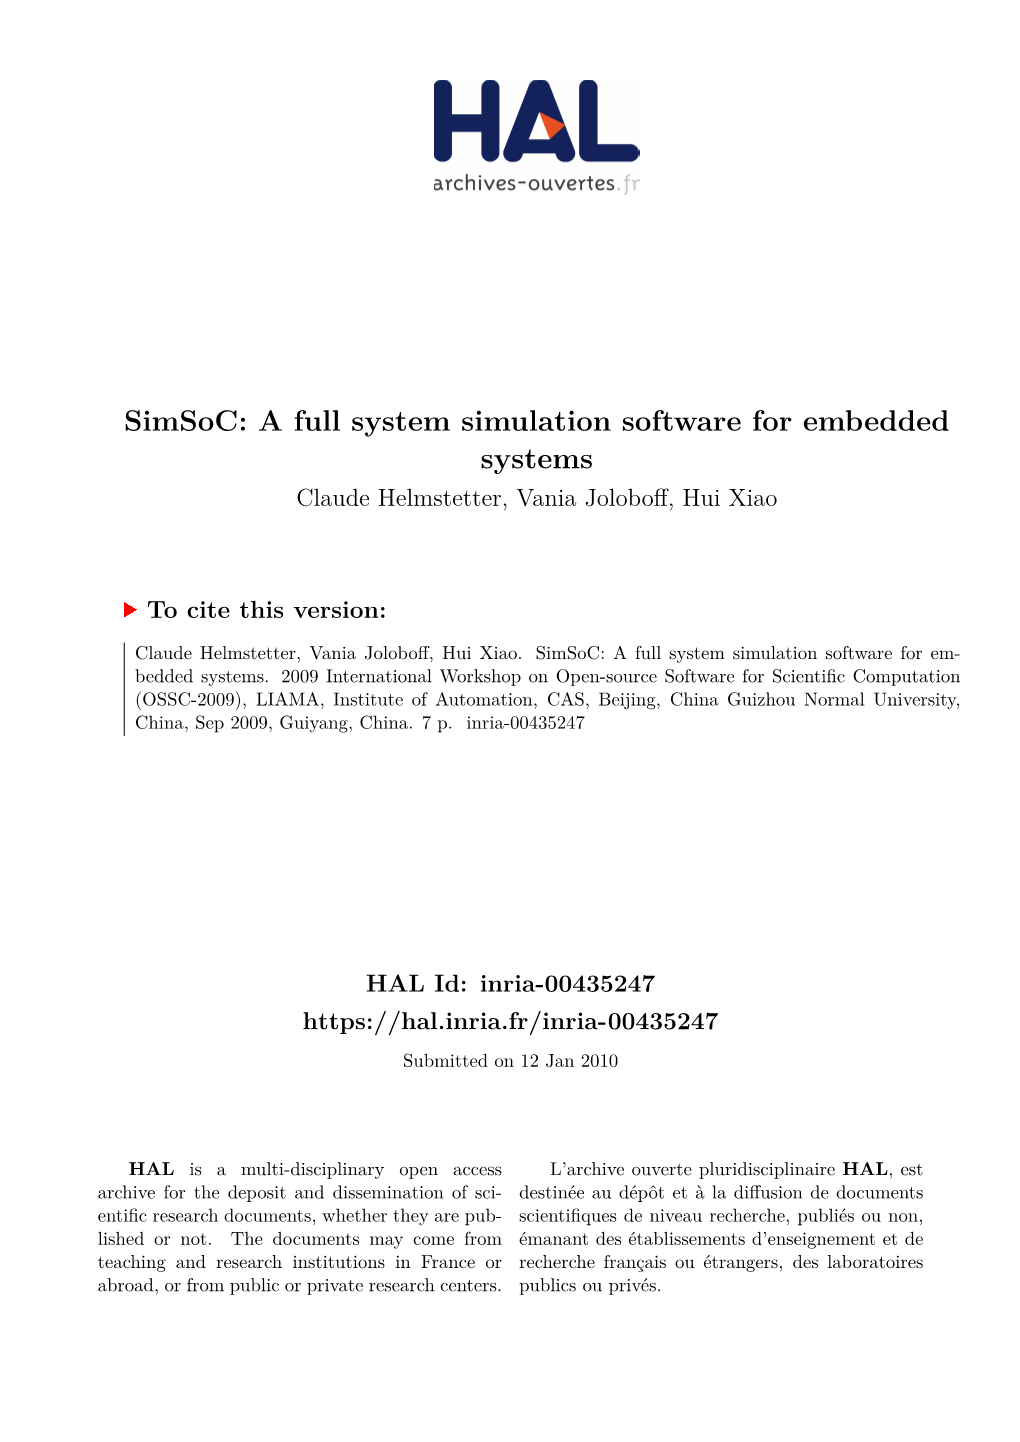 Simsoc: a Full System Simulation Software for Embedded Systems Claude Helmstetter, Vania Joloboff, Hui Xiao